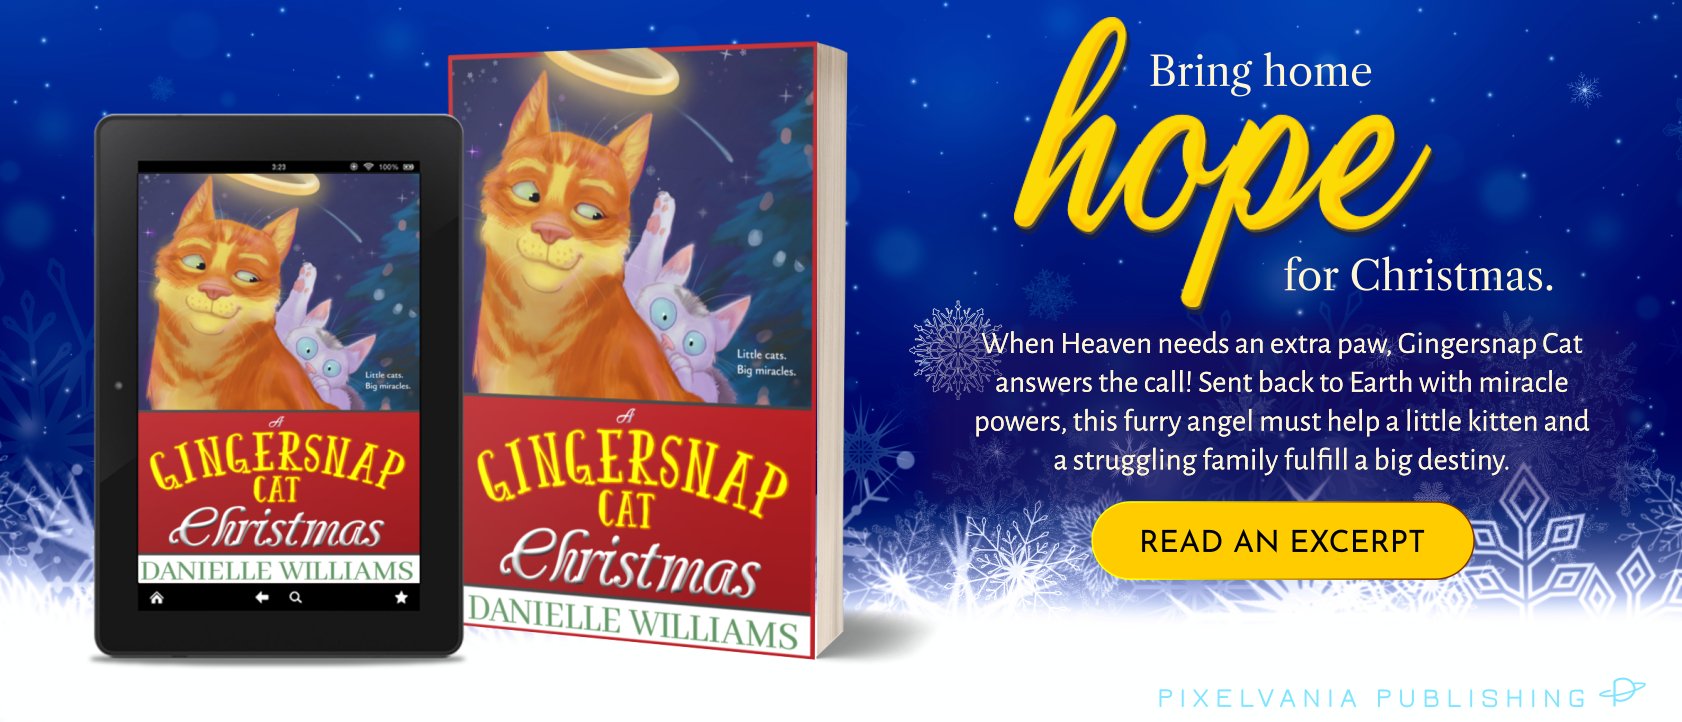 Click here to find out more and read an excerpt from A GINGERSNAP CAT CHRISTMAS